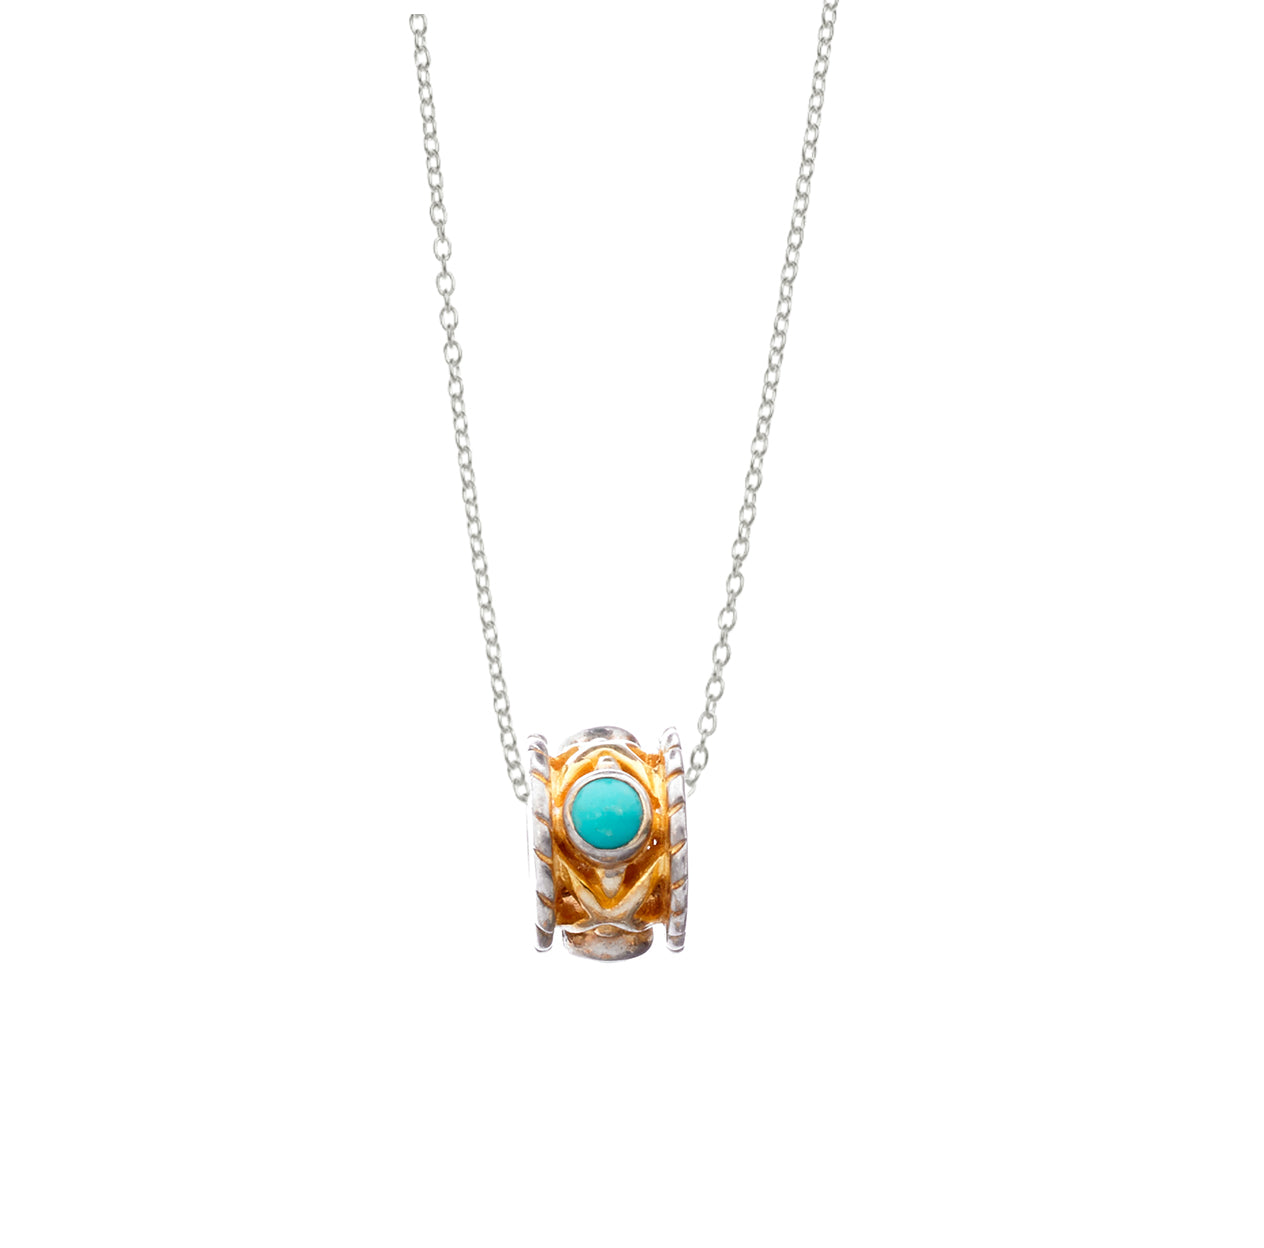 December Turquoise Sterling Silver with 14k Gold Vermeil Bead Necklace